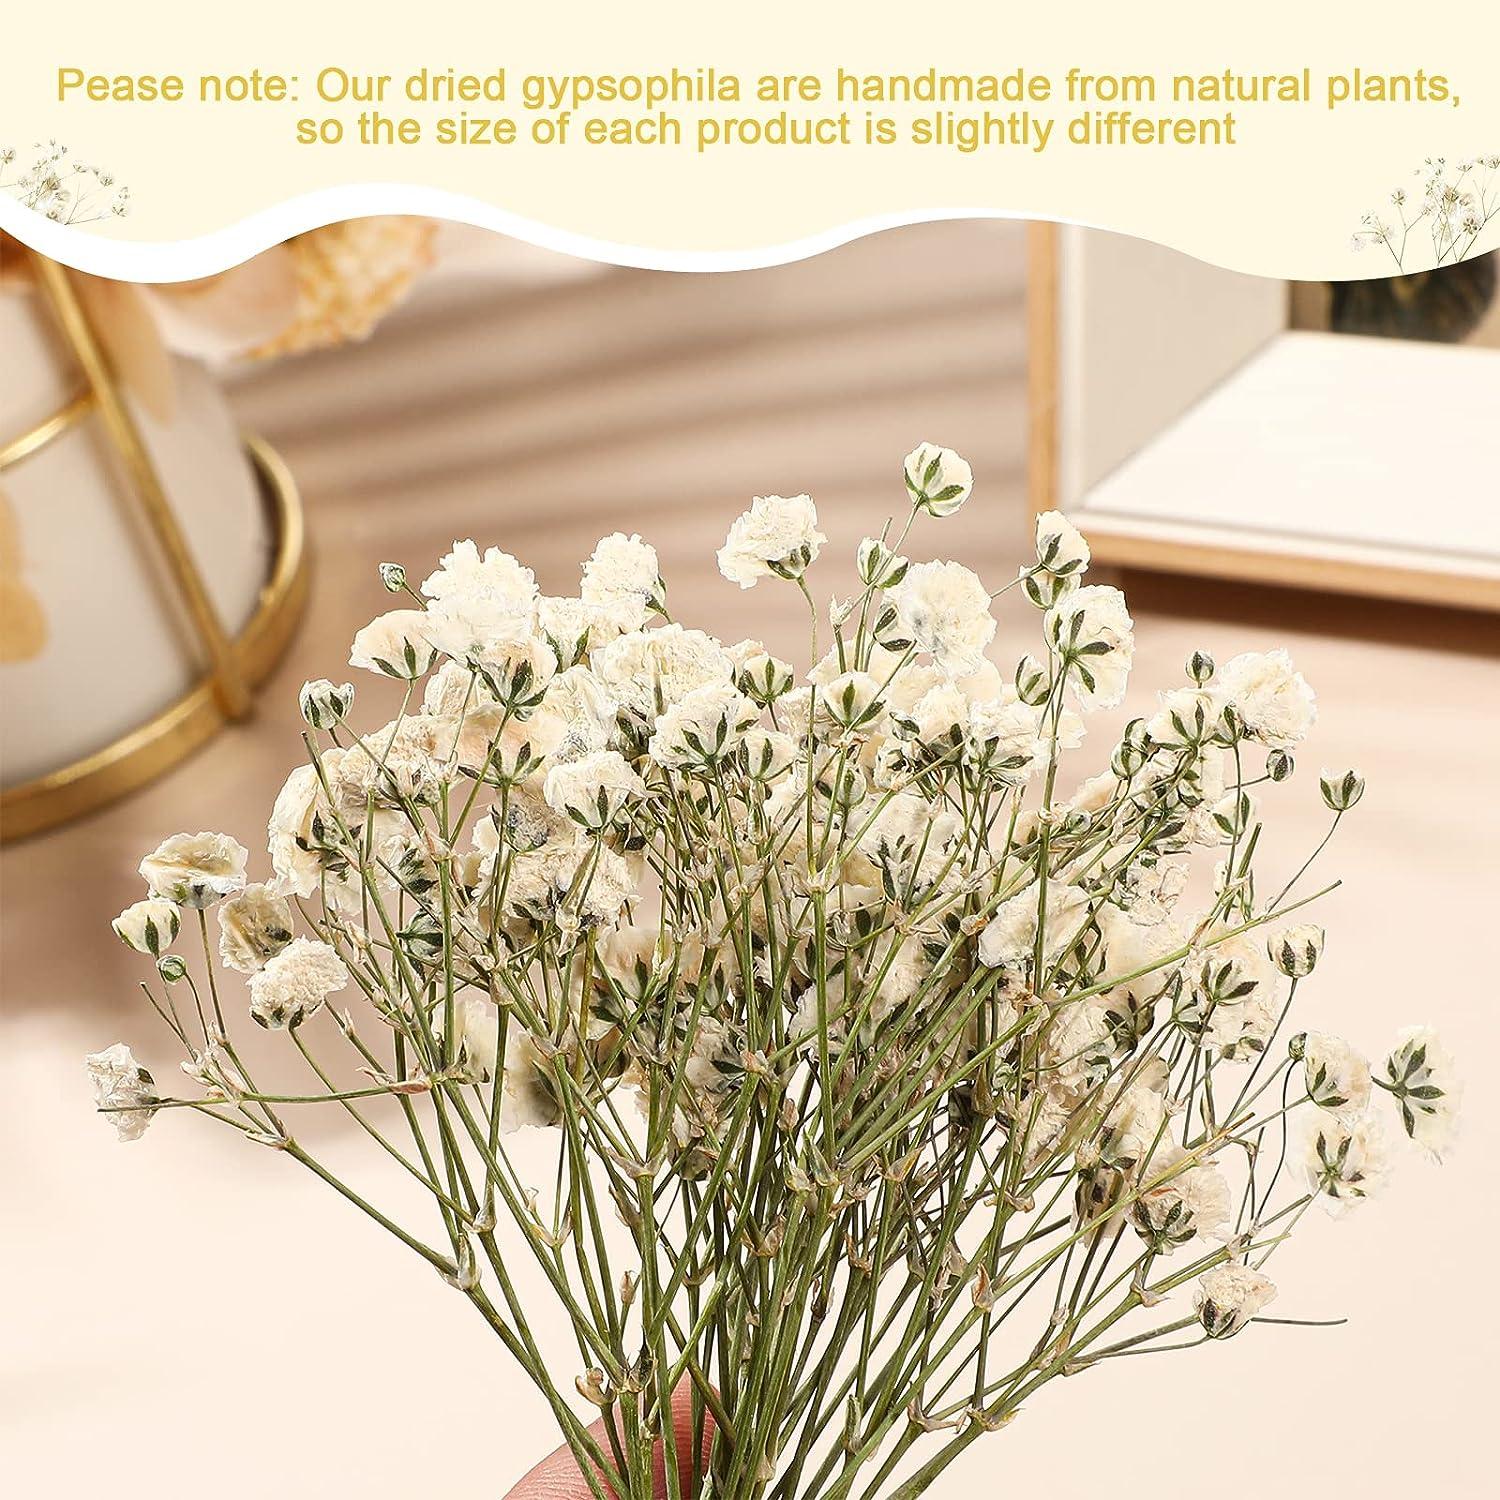 UOKWIWI 16 pcs White Baby's Breath Real Natural Dried Pressed Flowers for  Resin Art Craft DIY